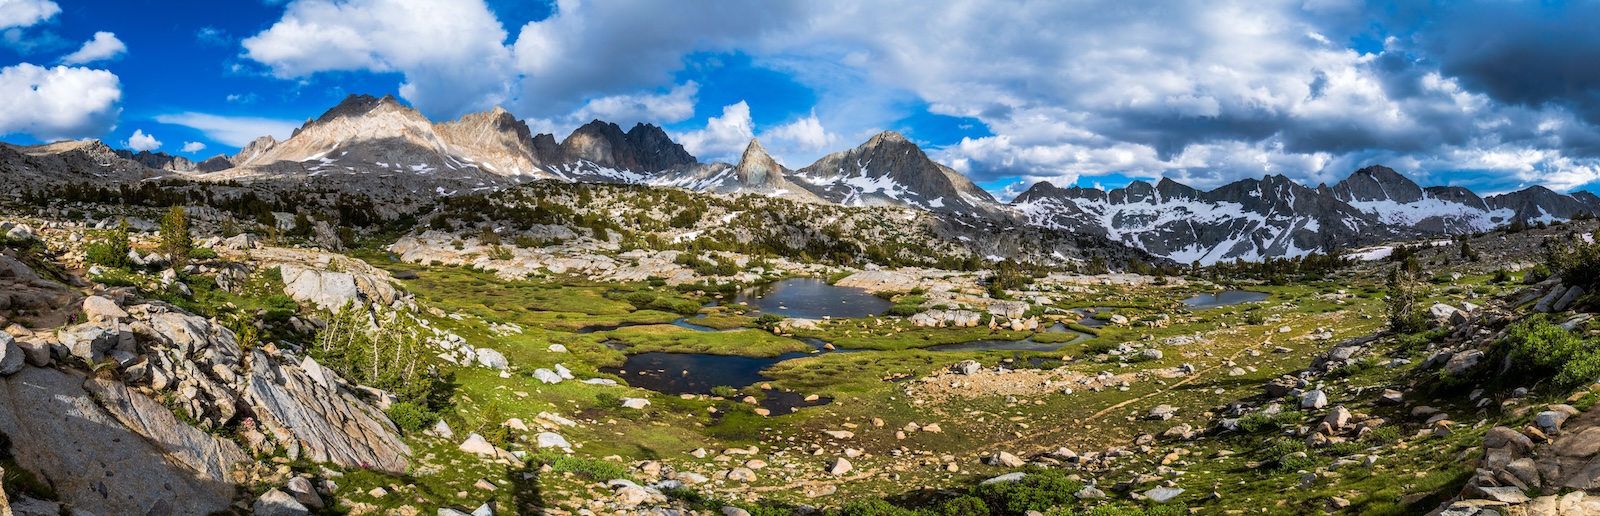 Alpine meadows in the Dusy Basin of Kings Canyon National Park in the Sierras